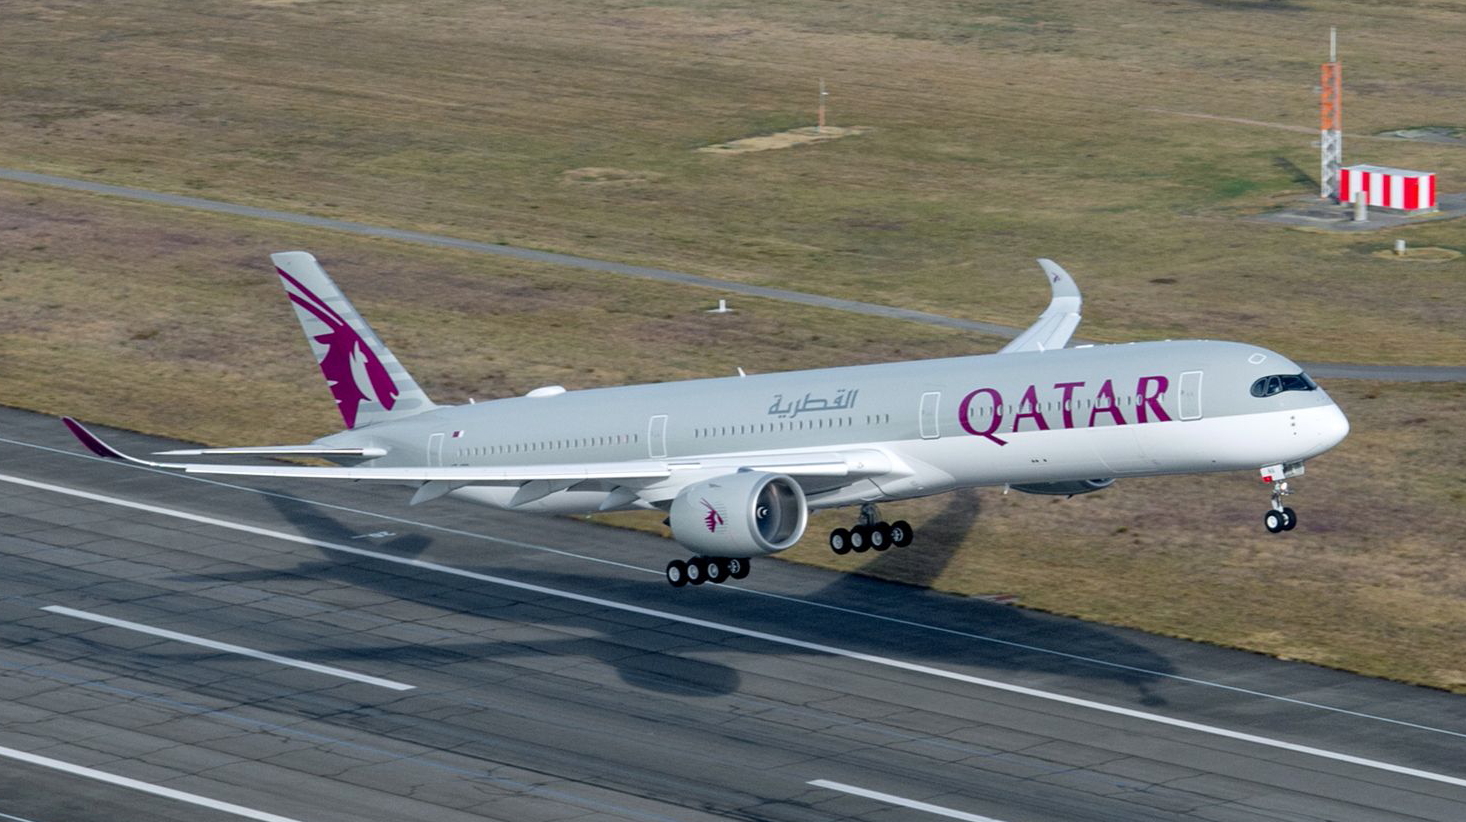 Qatar Airways Airbus A350-1000. Click to enlarge.